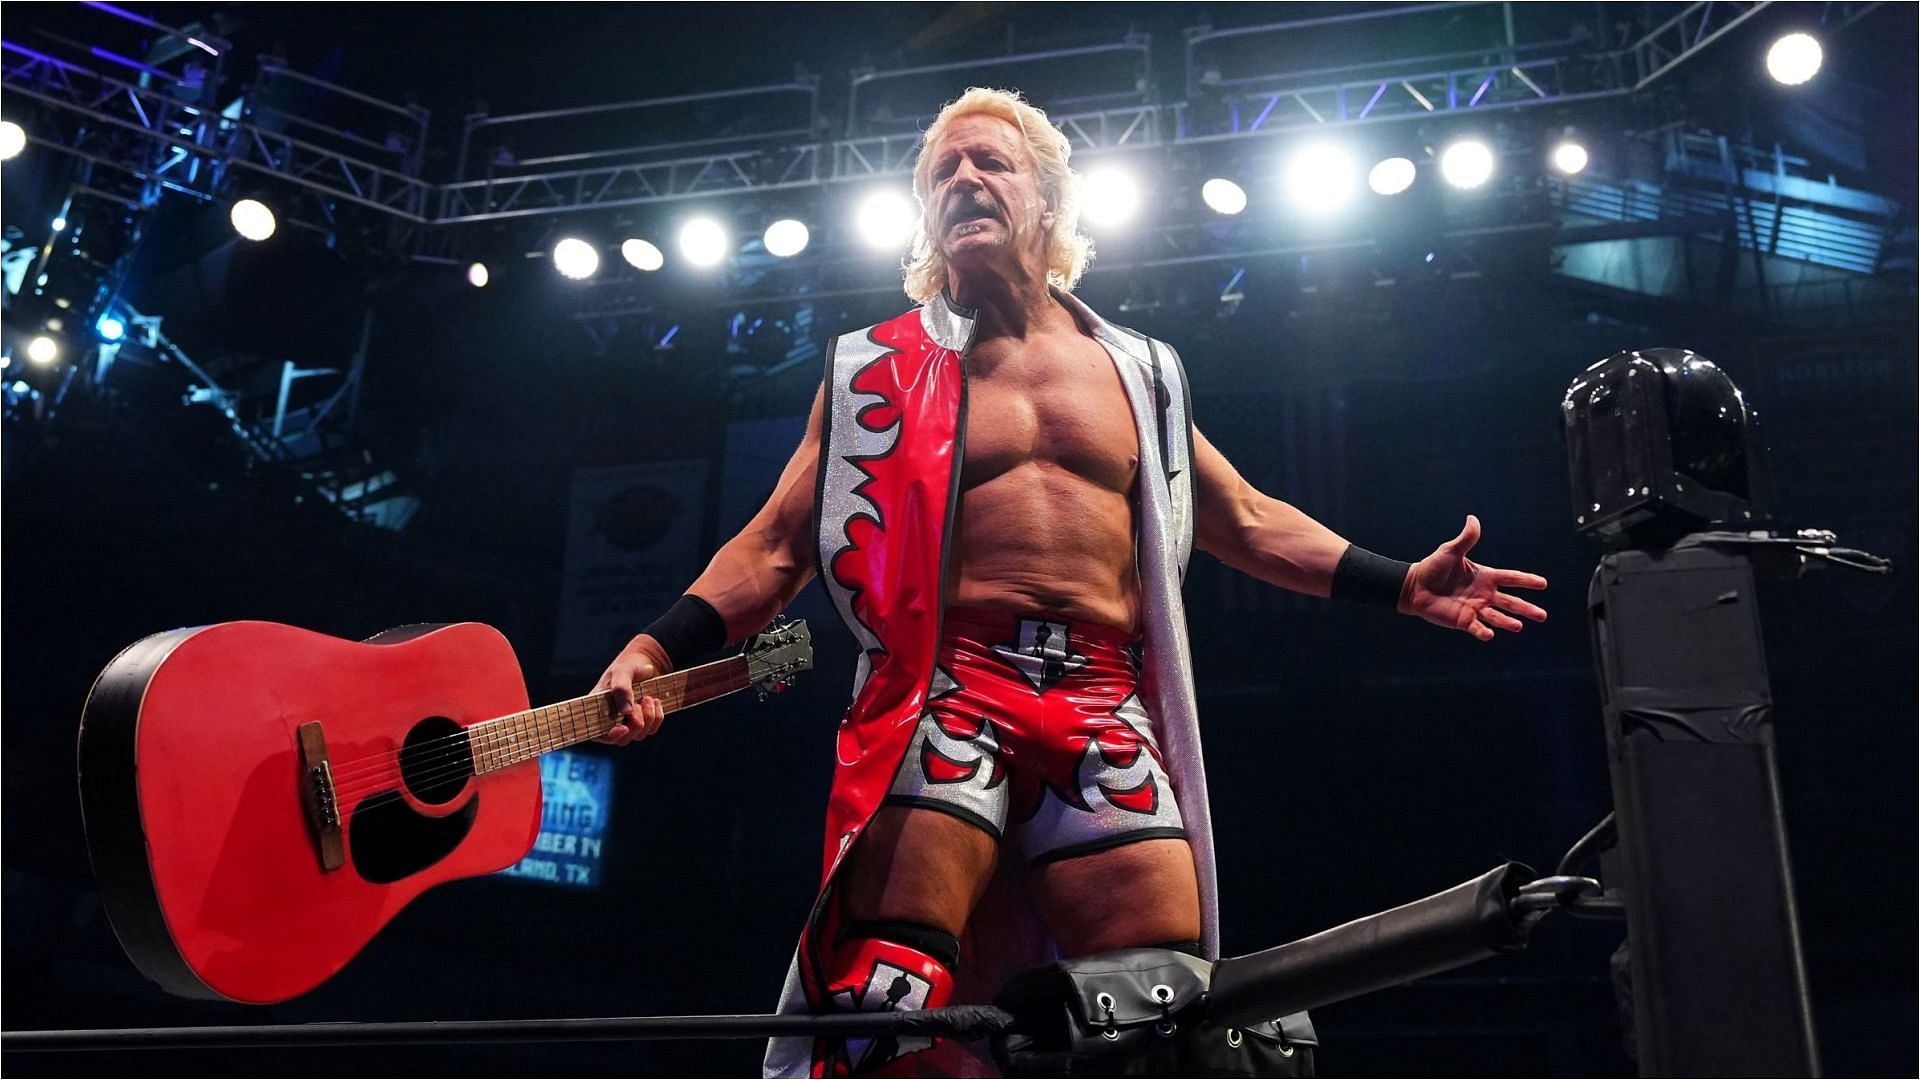 I Have Forgiven Her For Everything Aew Star Jeff Jarrett Opens Up On Rocky Relationship With